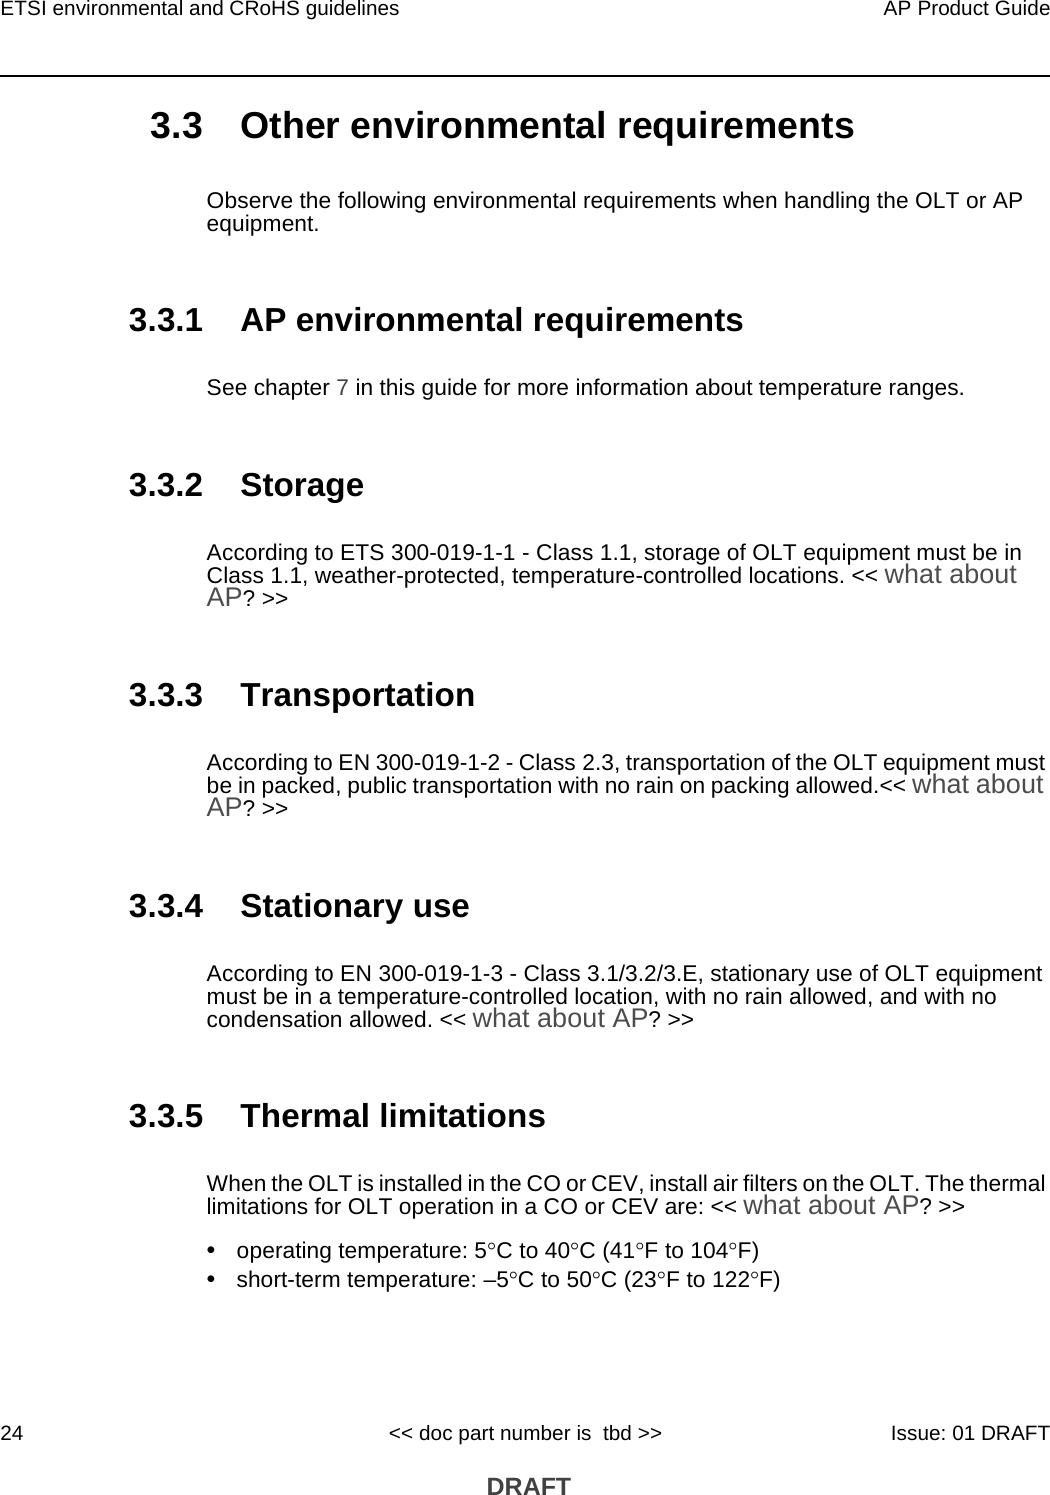 ETSI environmental and CRoHS guidelines24AP Product Guide&lt;&lt; doc part number is  tbd &gt;&gt; Issue: 01 DRAFT DRAFT3.3 Other environmental requirementsObserve the following environmental requirements when handling the OLT or AP equipment.3.3.1 AP environmental requirementsSee chapter 7 in this guide for more information about temperature ranges. 3.3.2 StorageAccording to ETS 300-019-1-1 - Class 1.1, storage of OLT equipment must be in Class 1.1, weather-protected, temperature-controlled locations. &lt;&lt; what about AP? &gt;&gt;3.3.3 TransportationAccording to EN 300-019-1-2 - Class 2.3, transportation of the OLT equipment must be in packed, public transportation with no rain on packing allowed.&lt;&lt; what about AP? &gt;&gt;3.3.4 Stationary useAccording to EN 300-019-1-3 - Class 3.1/3.2/3.E, stationary use of OLT equipment must be in a temperature-controlled location, with no rain allowed, and with no condensation allowed. &lt;&lt; what about AP? &gt;&gt;3.3.5 Thermal limitationsWhen the OLT is installed in the CO or CEV, install air filters on the OLT. The thermal limitations for OLT operation in a CO or CEV are: &lt;&lt; what about AP? &gt;&gt;•operating temperature: 5C to 40C (41F to 104F)•short-term temperature: –5C to 50C (23F to 122F)